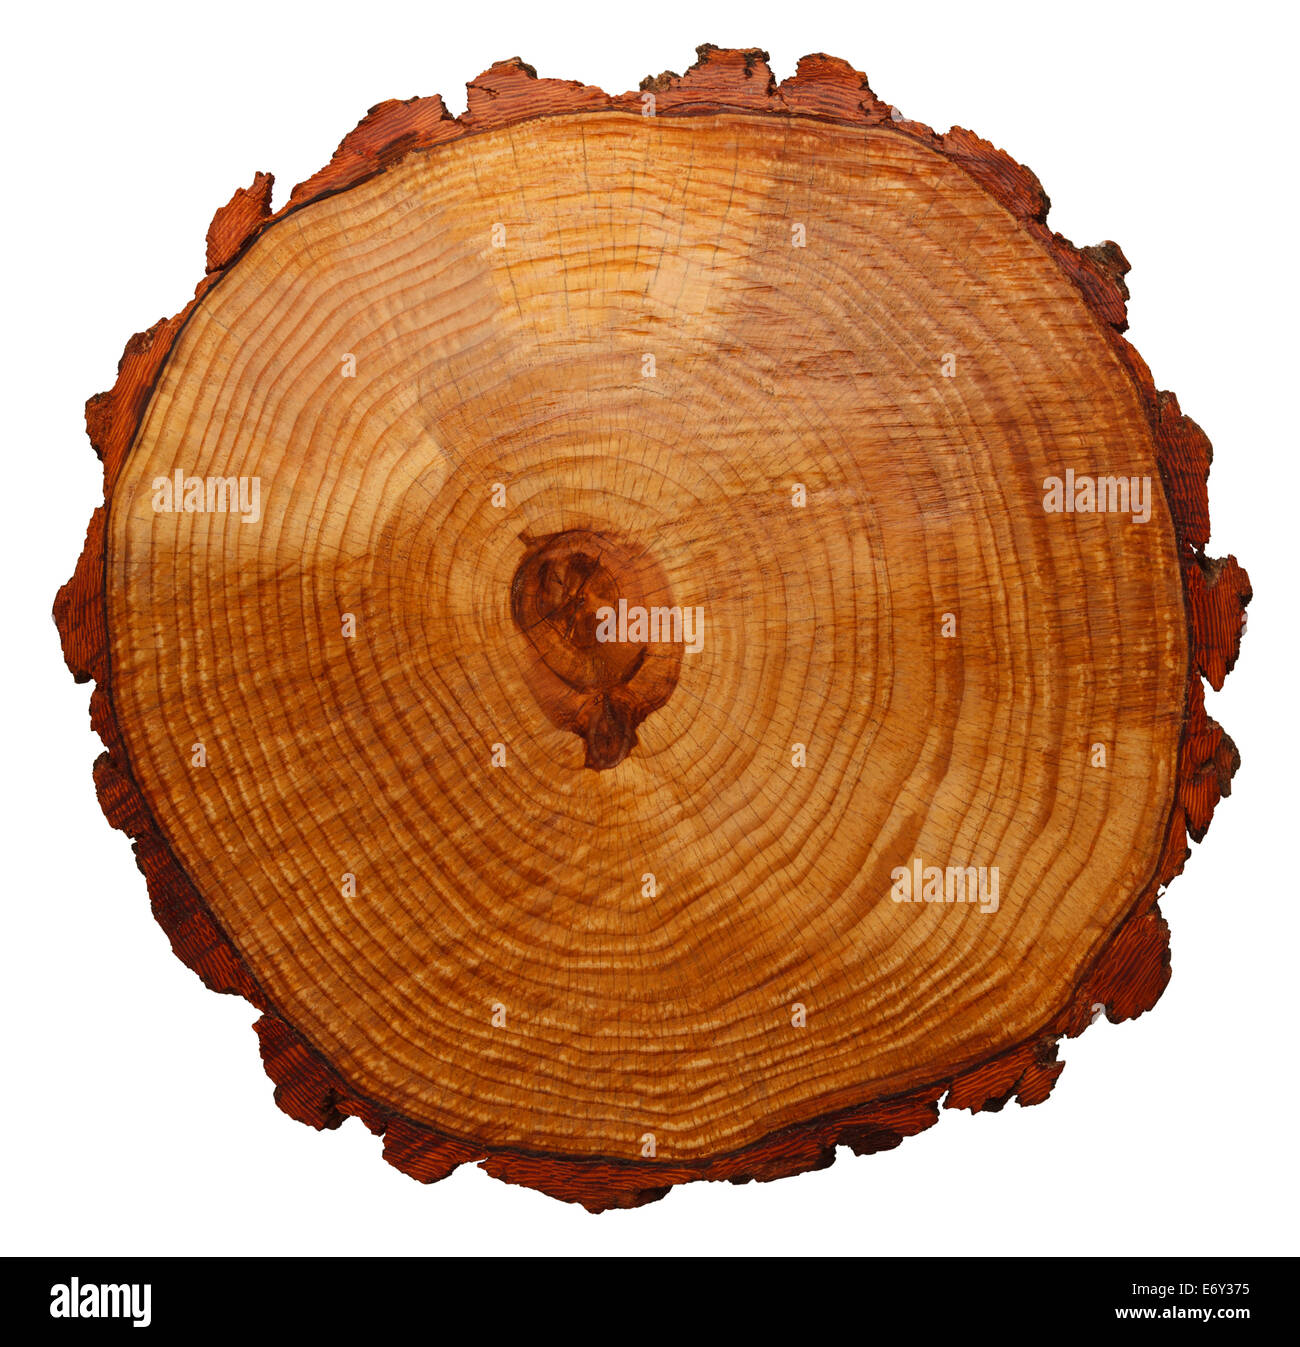 Wood Grain Tree Cross Section Isolated On White Background. Stock Photo